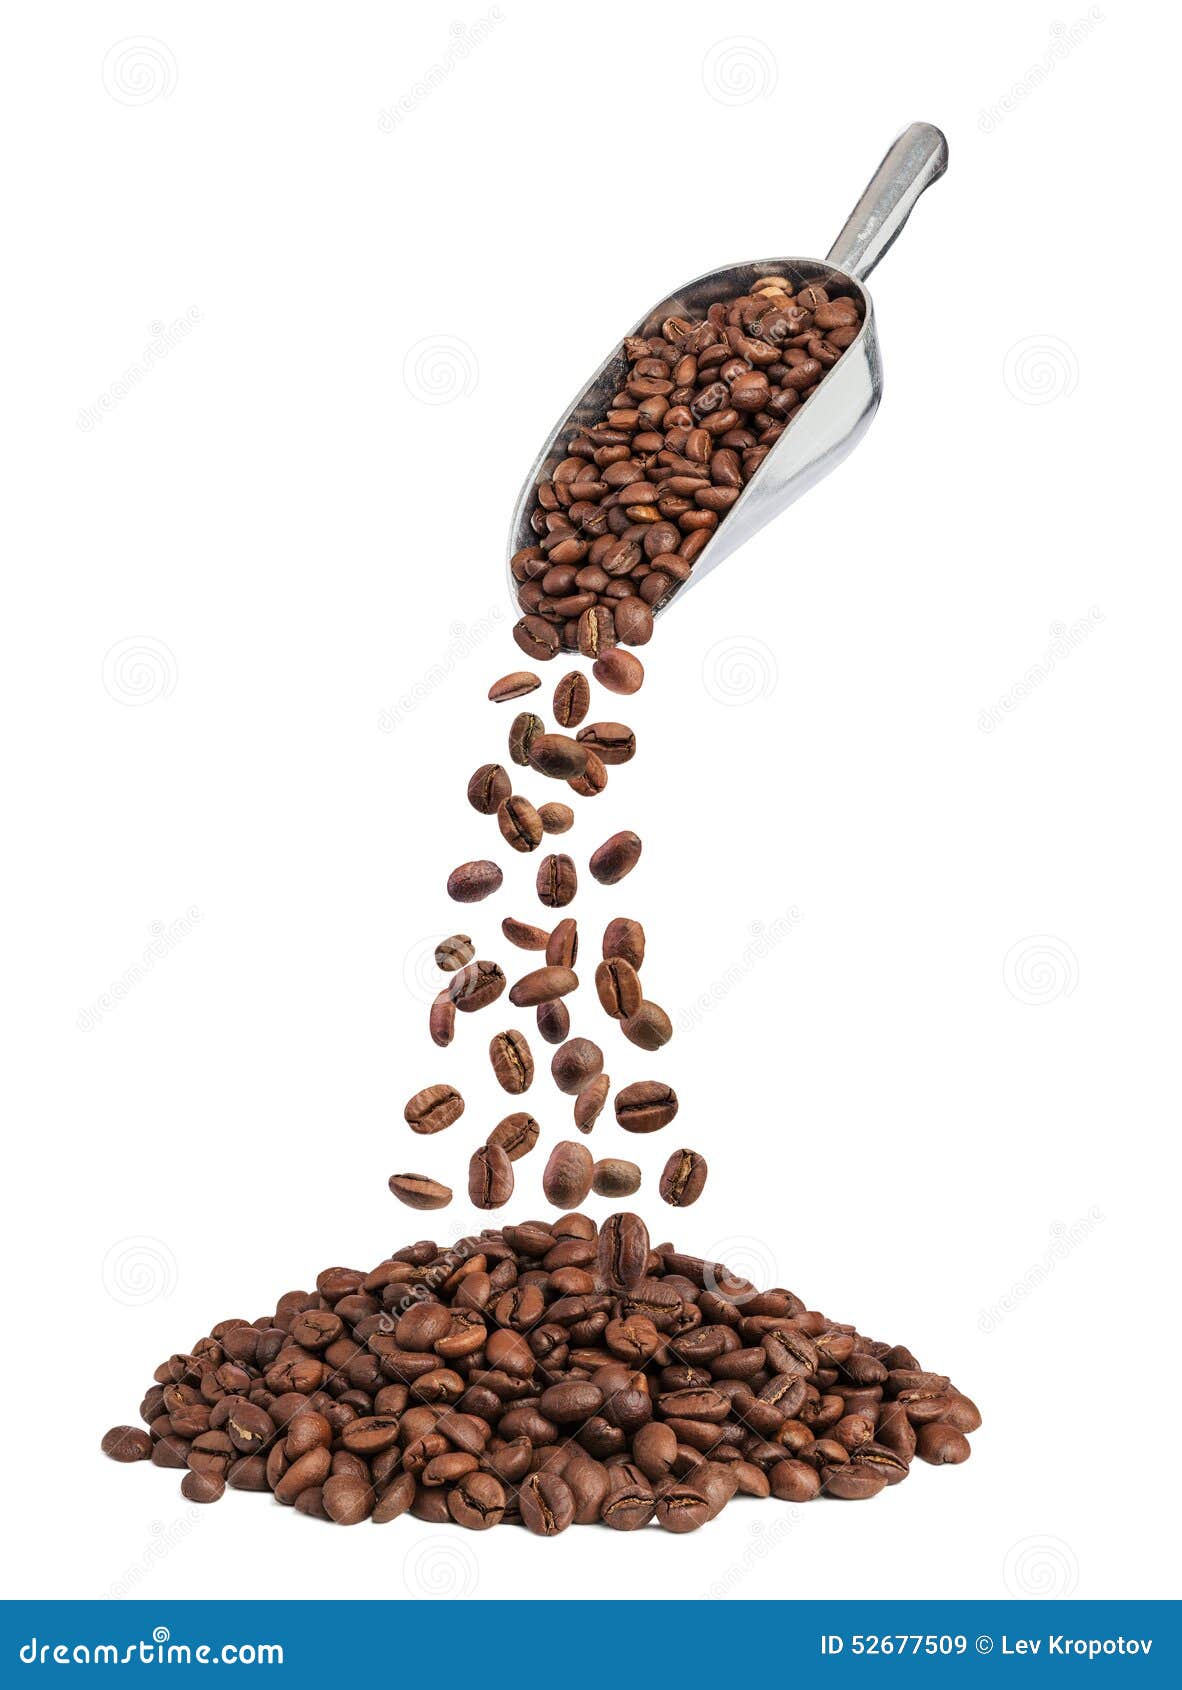 Roasted coffee beans falling down from metal scoop isolated on white